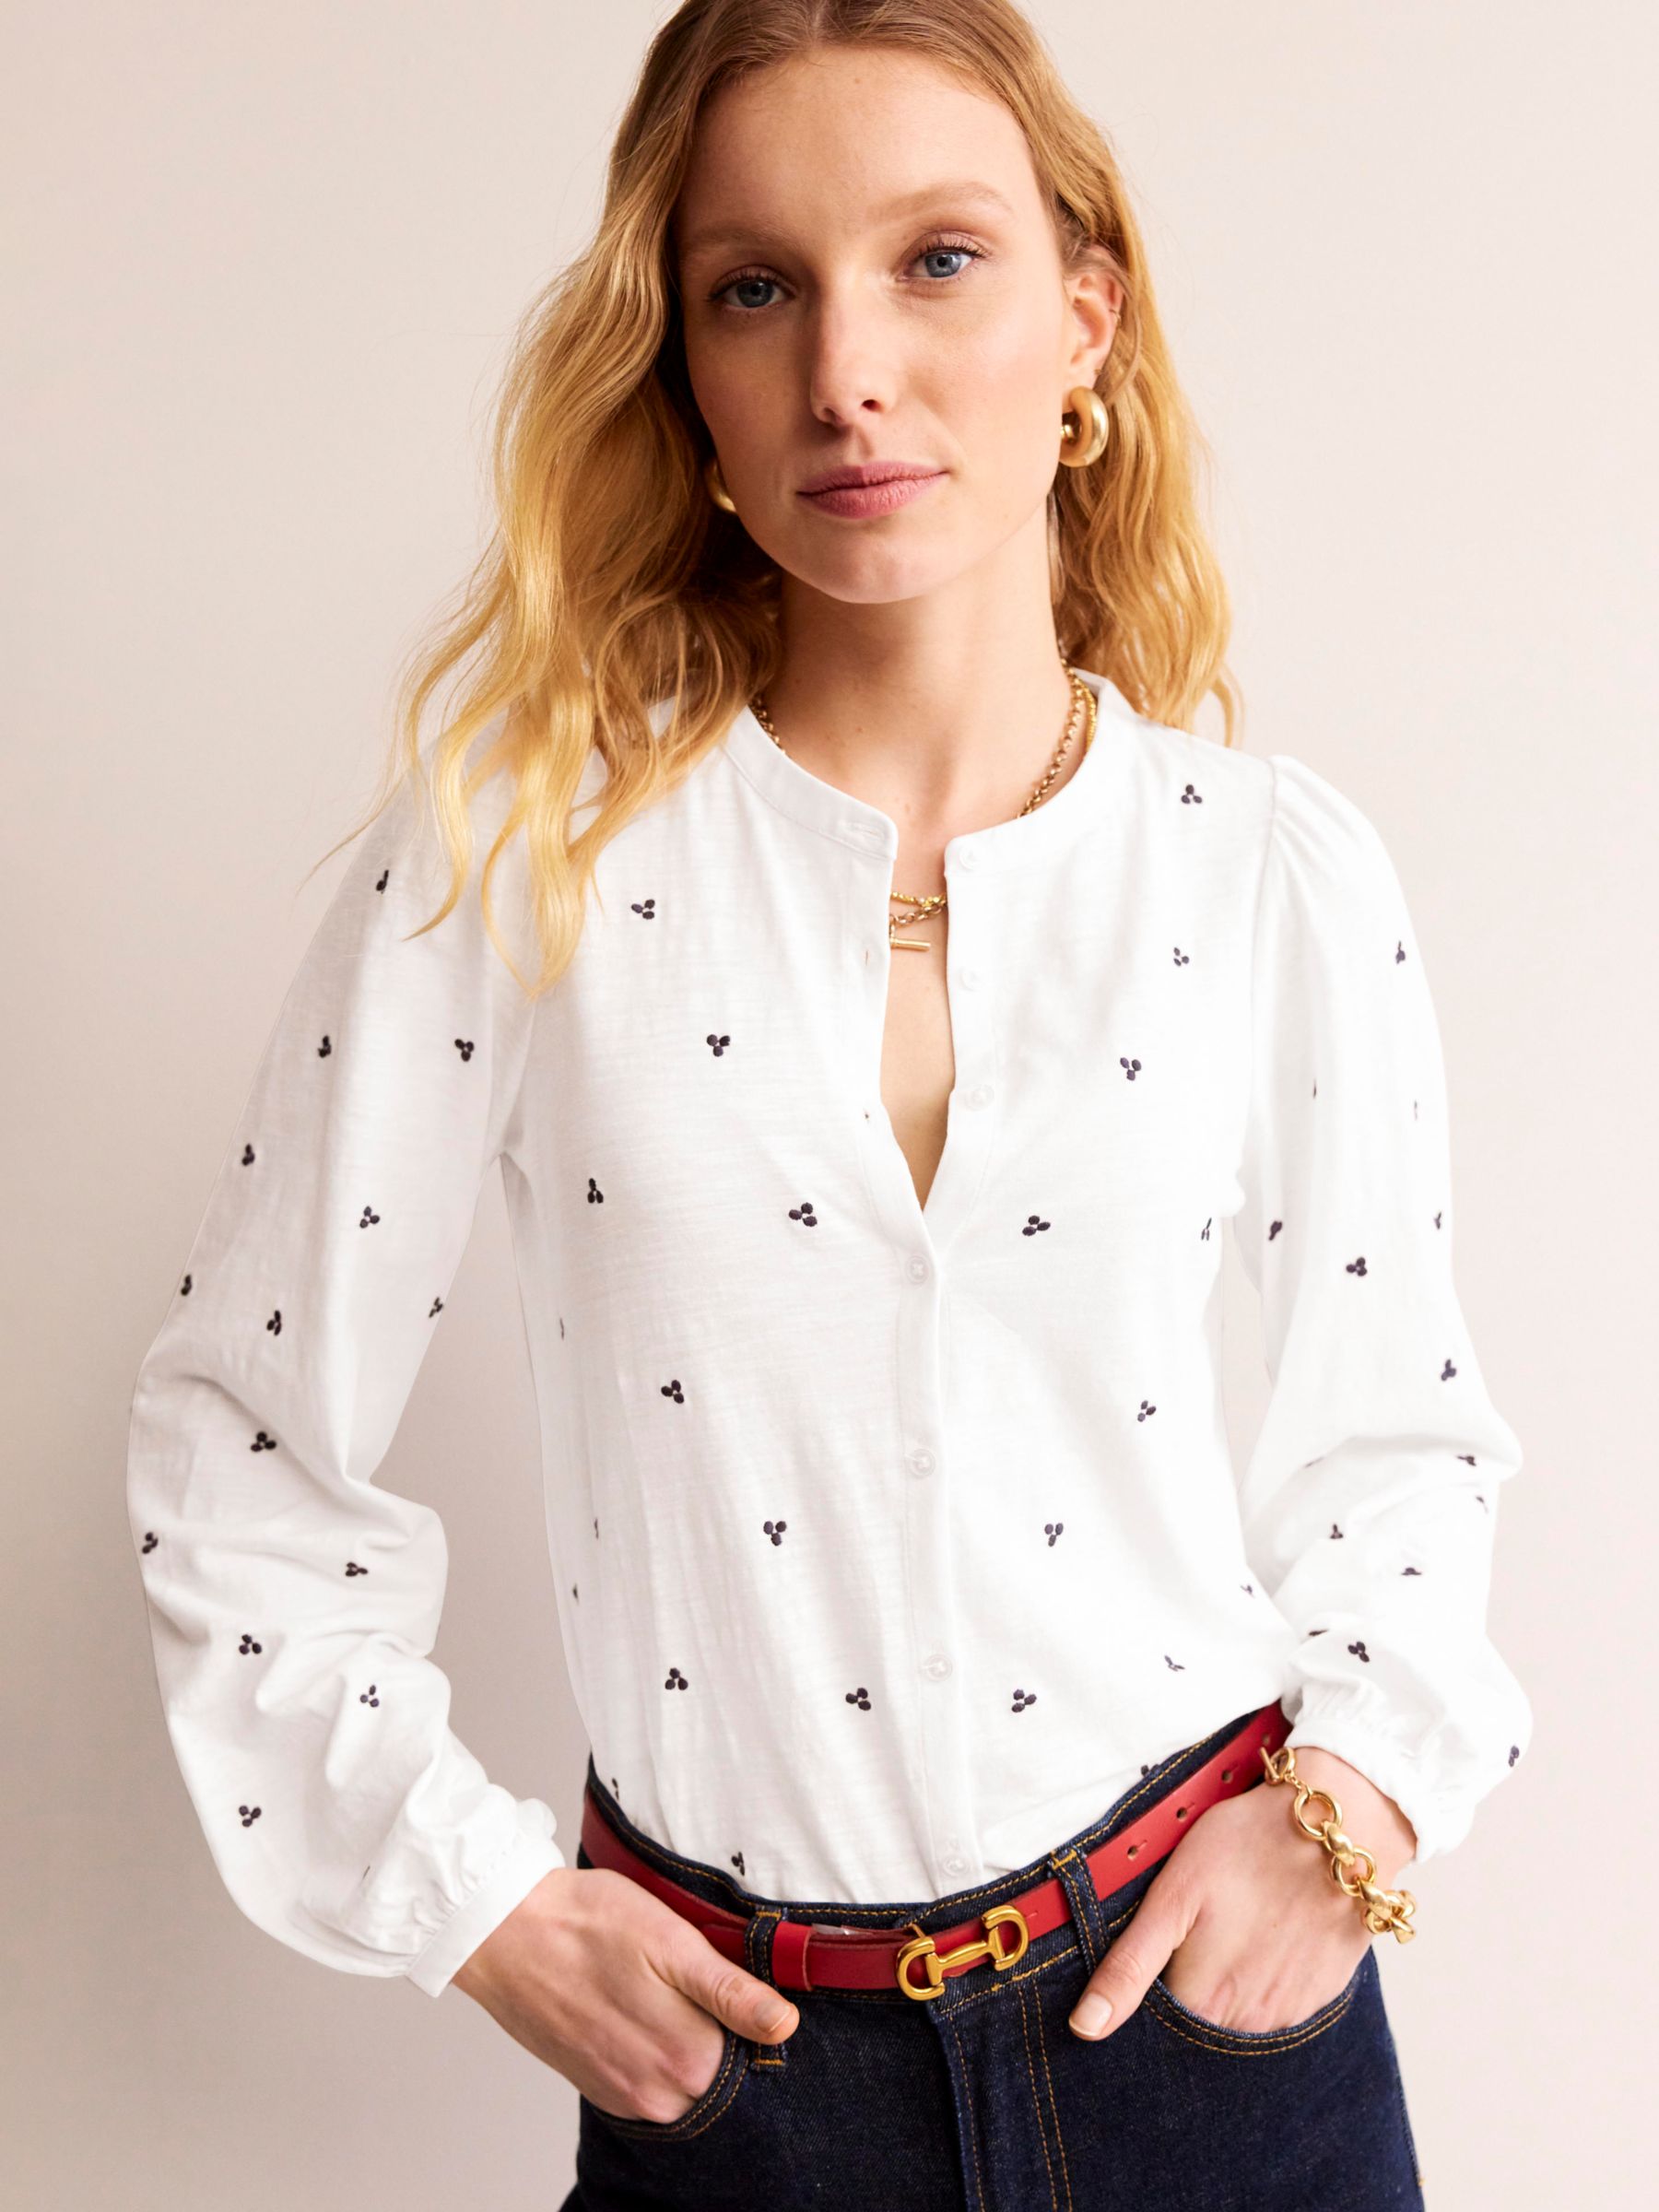 Boden Marina Embroidered Spot Top, White/Navy at John Lewis & Partners